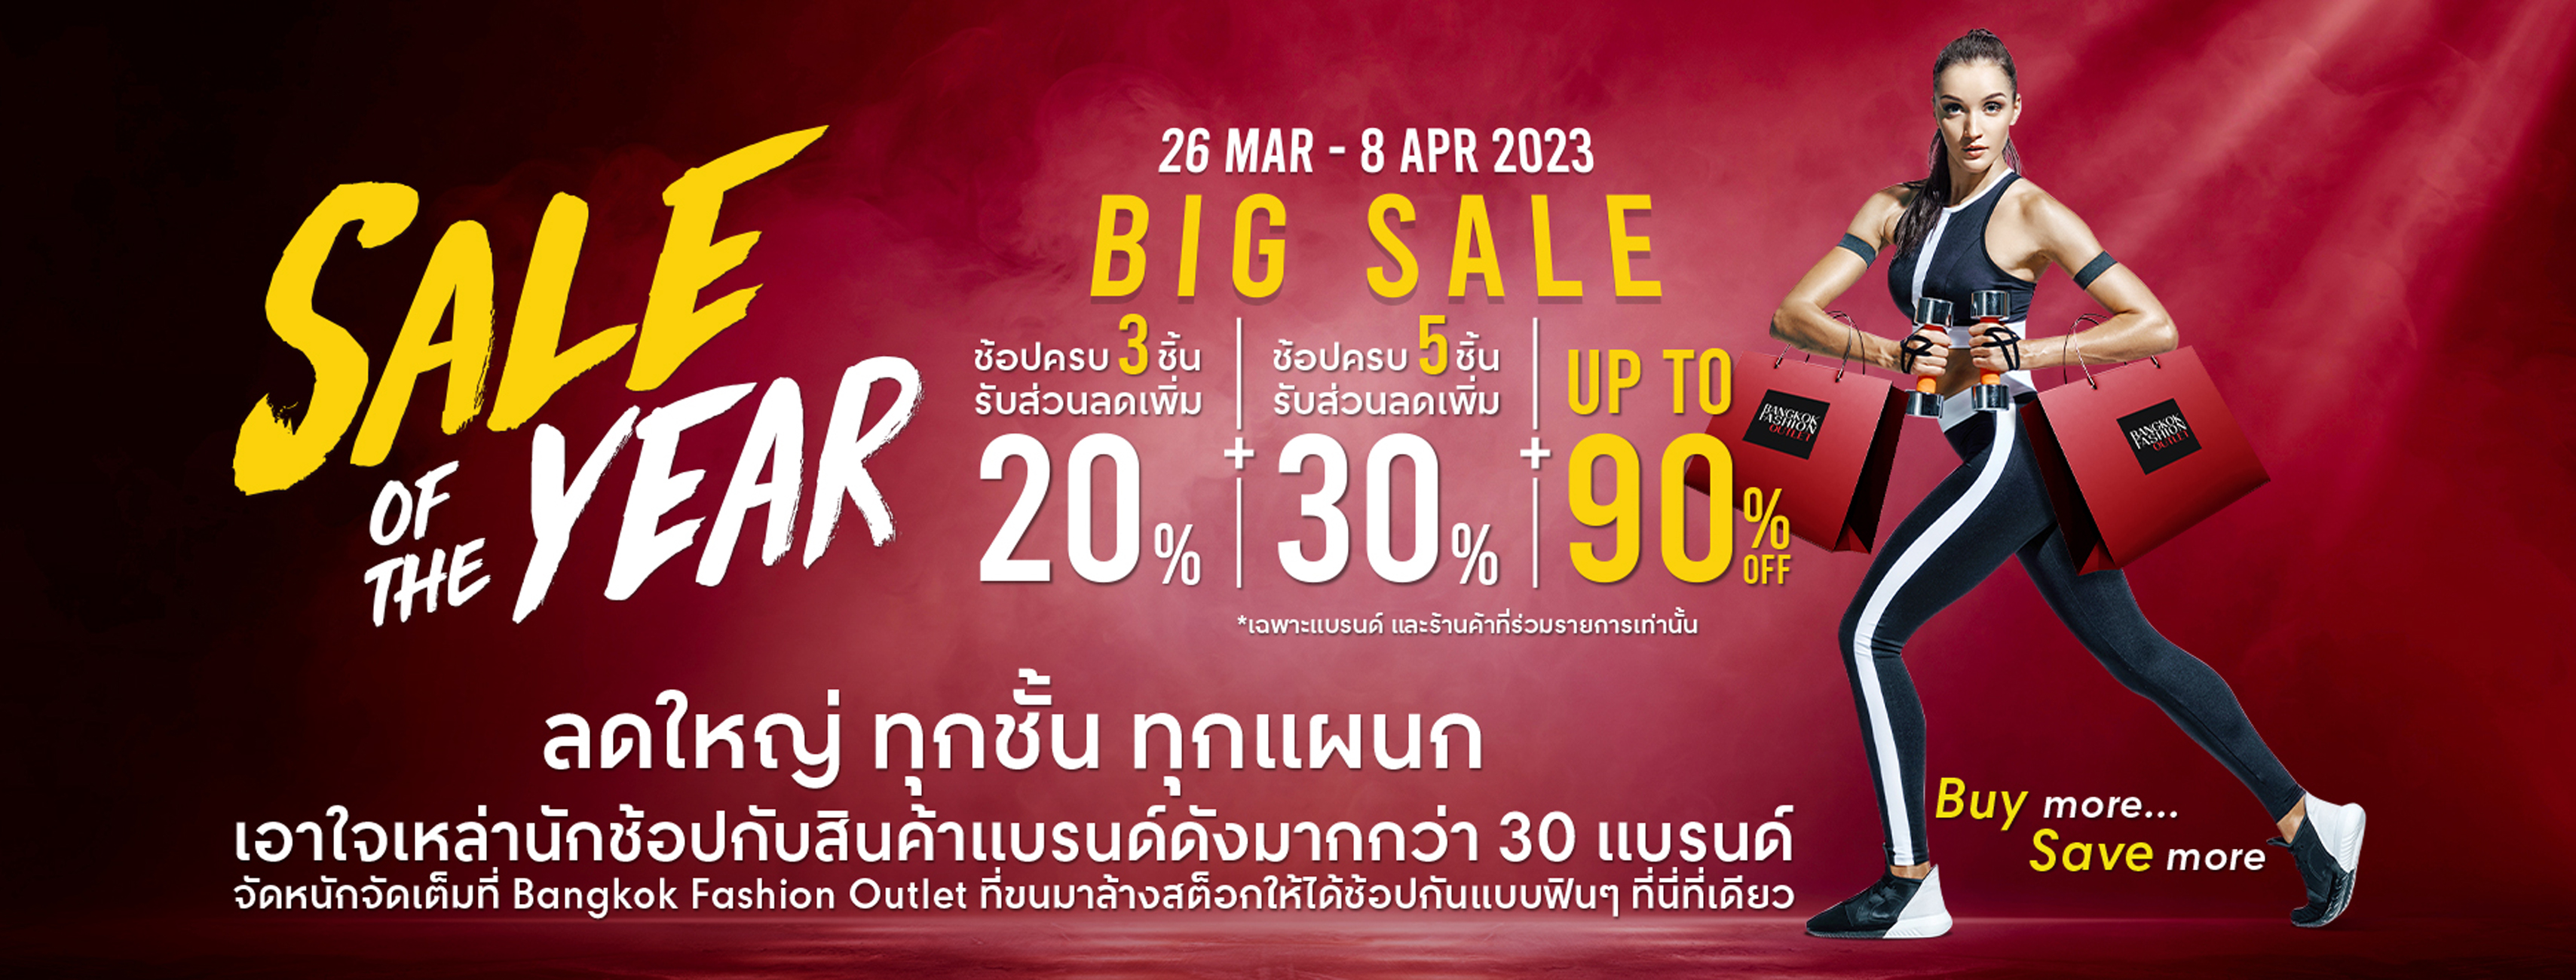 Bangkok Fashion Outlet Sale of the Year